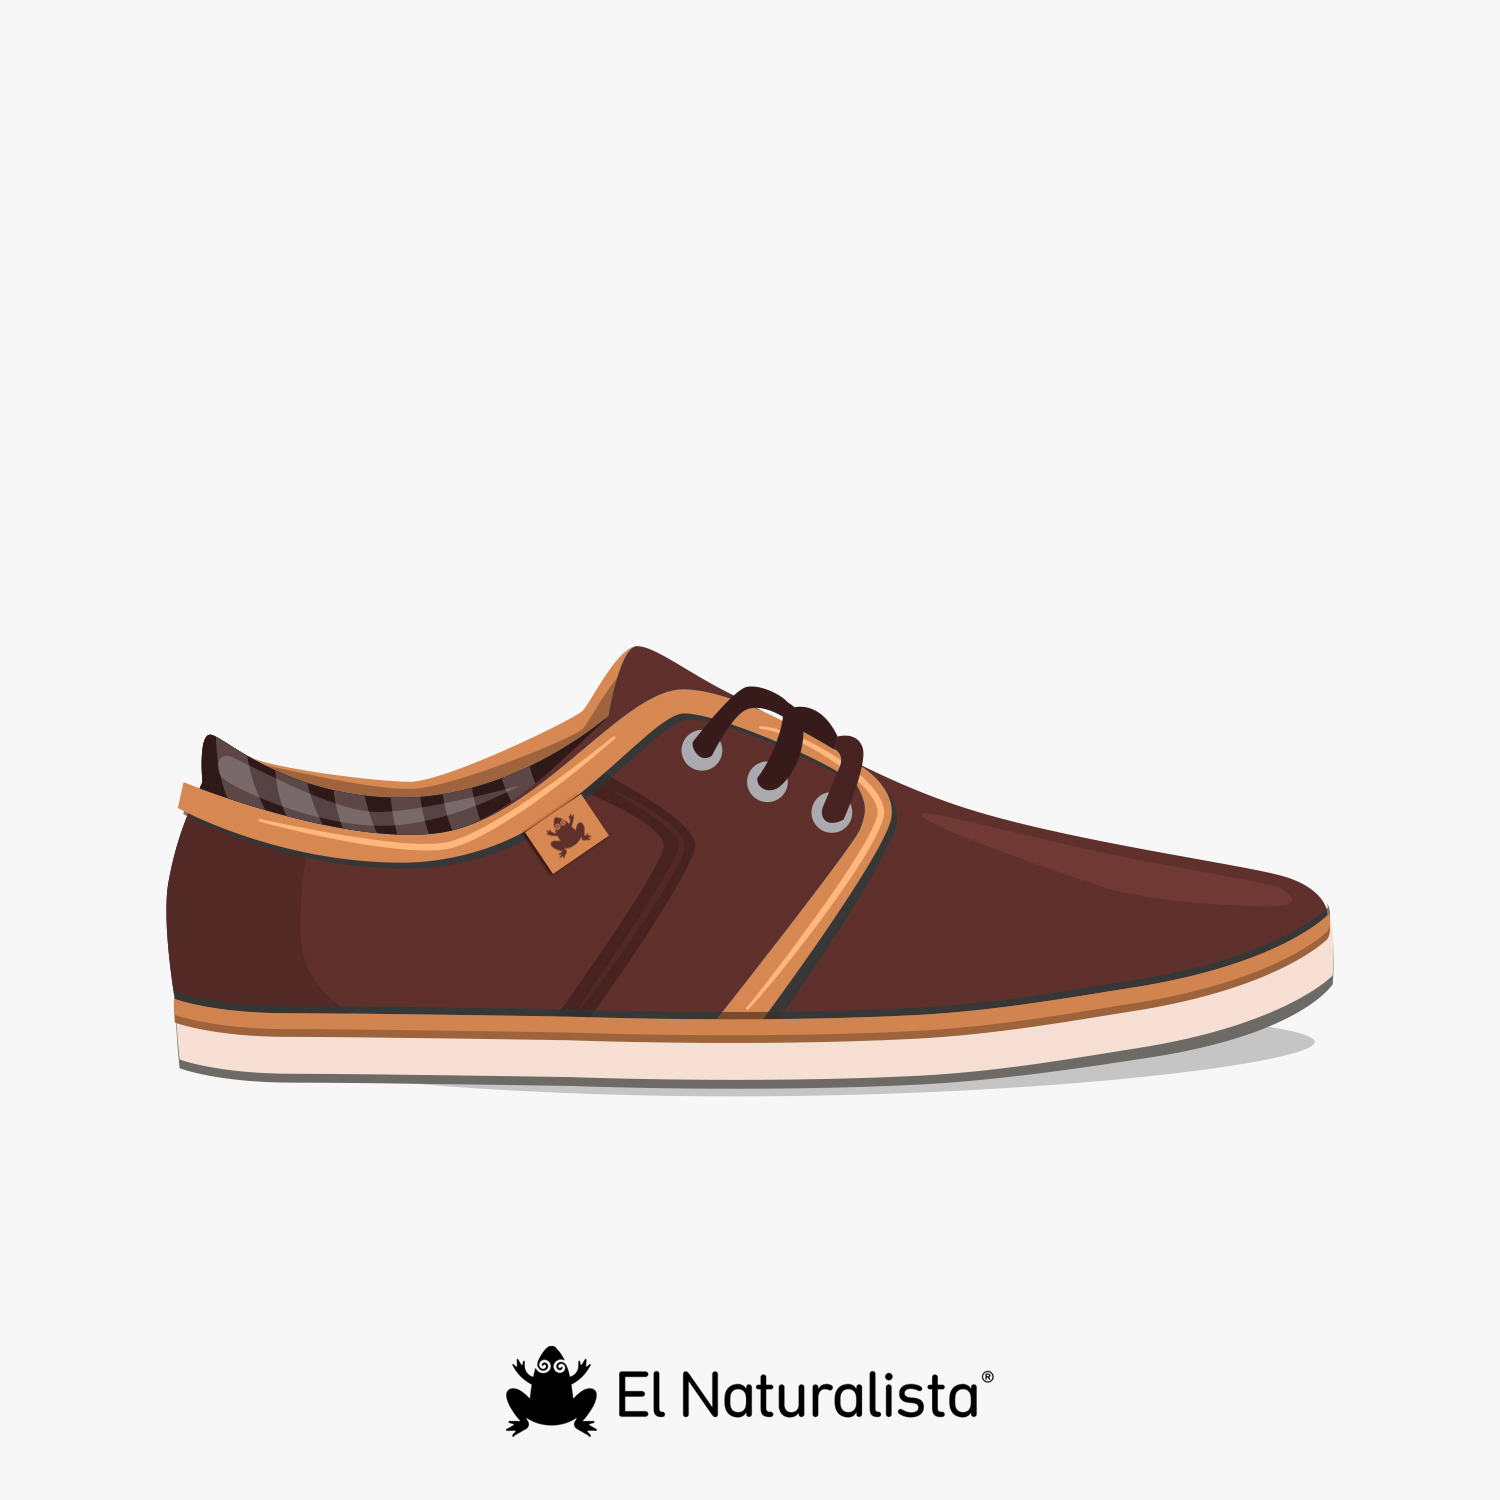 El Naturalista | New Collection | Sustainable Design and Quality 